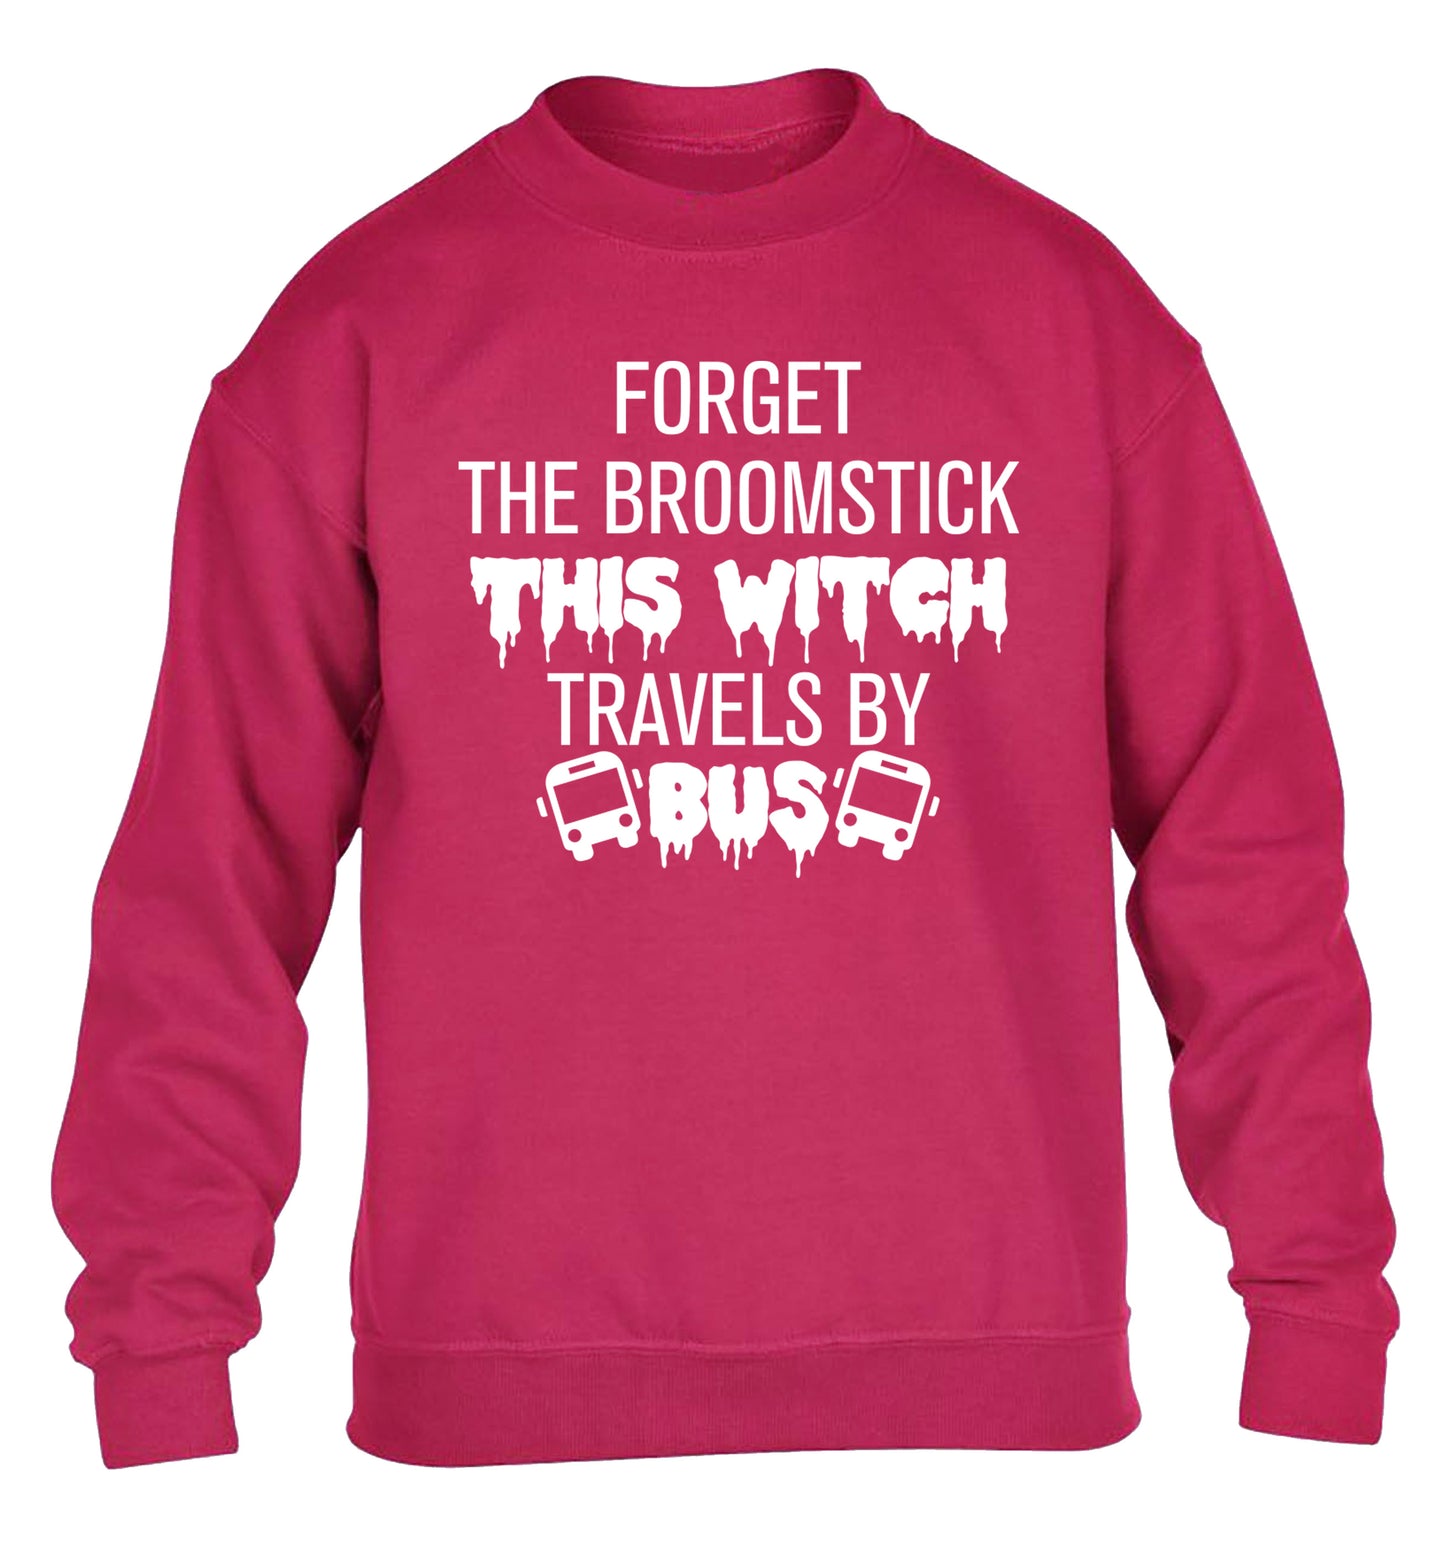 Forget the broomstick this witch travels by bus children's pink sweater 12-14 Years